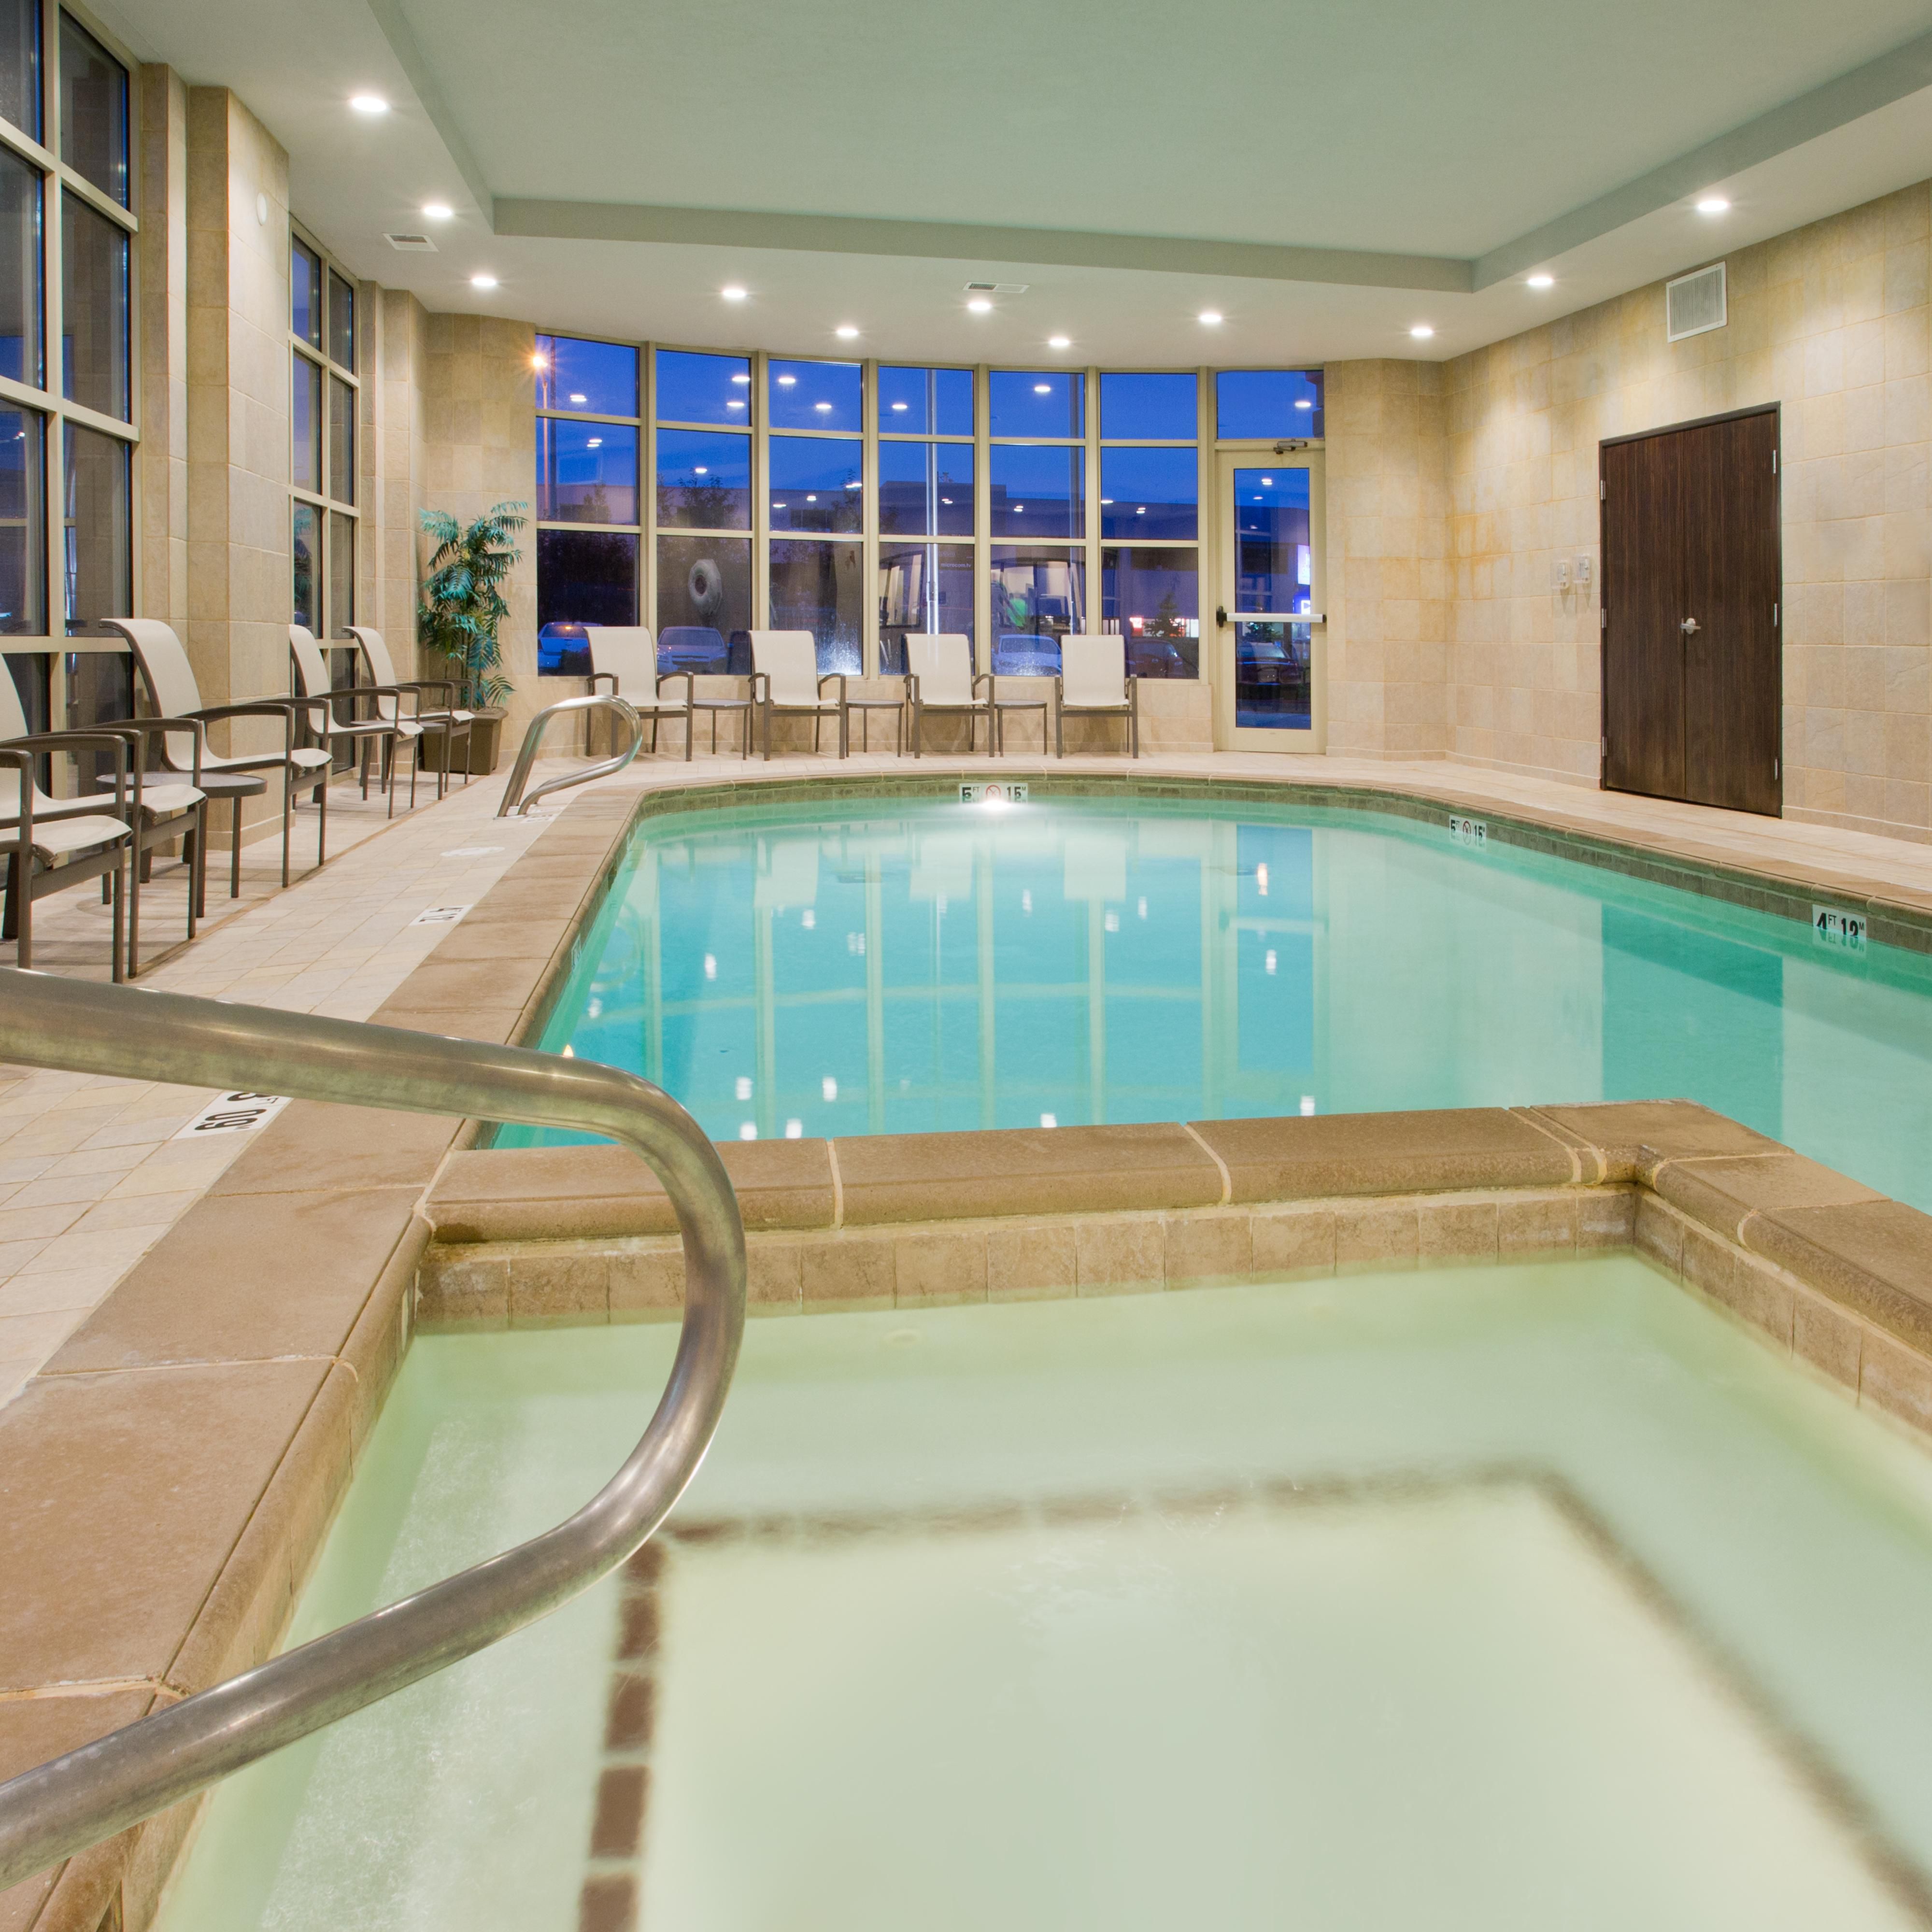 Shake off the Alaskan chill in our indoor pool and spa